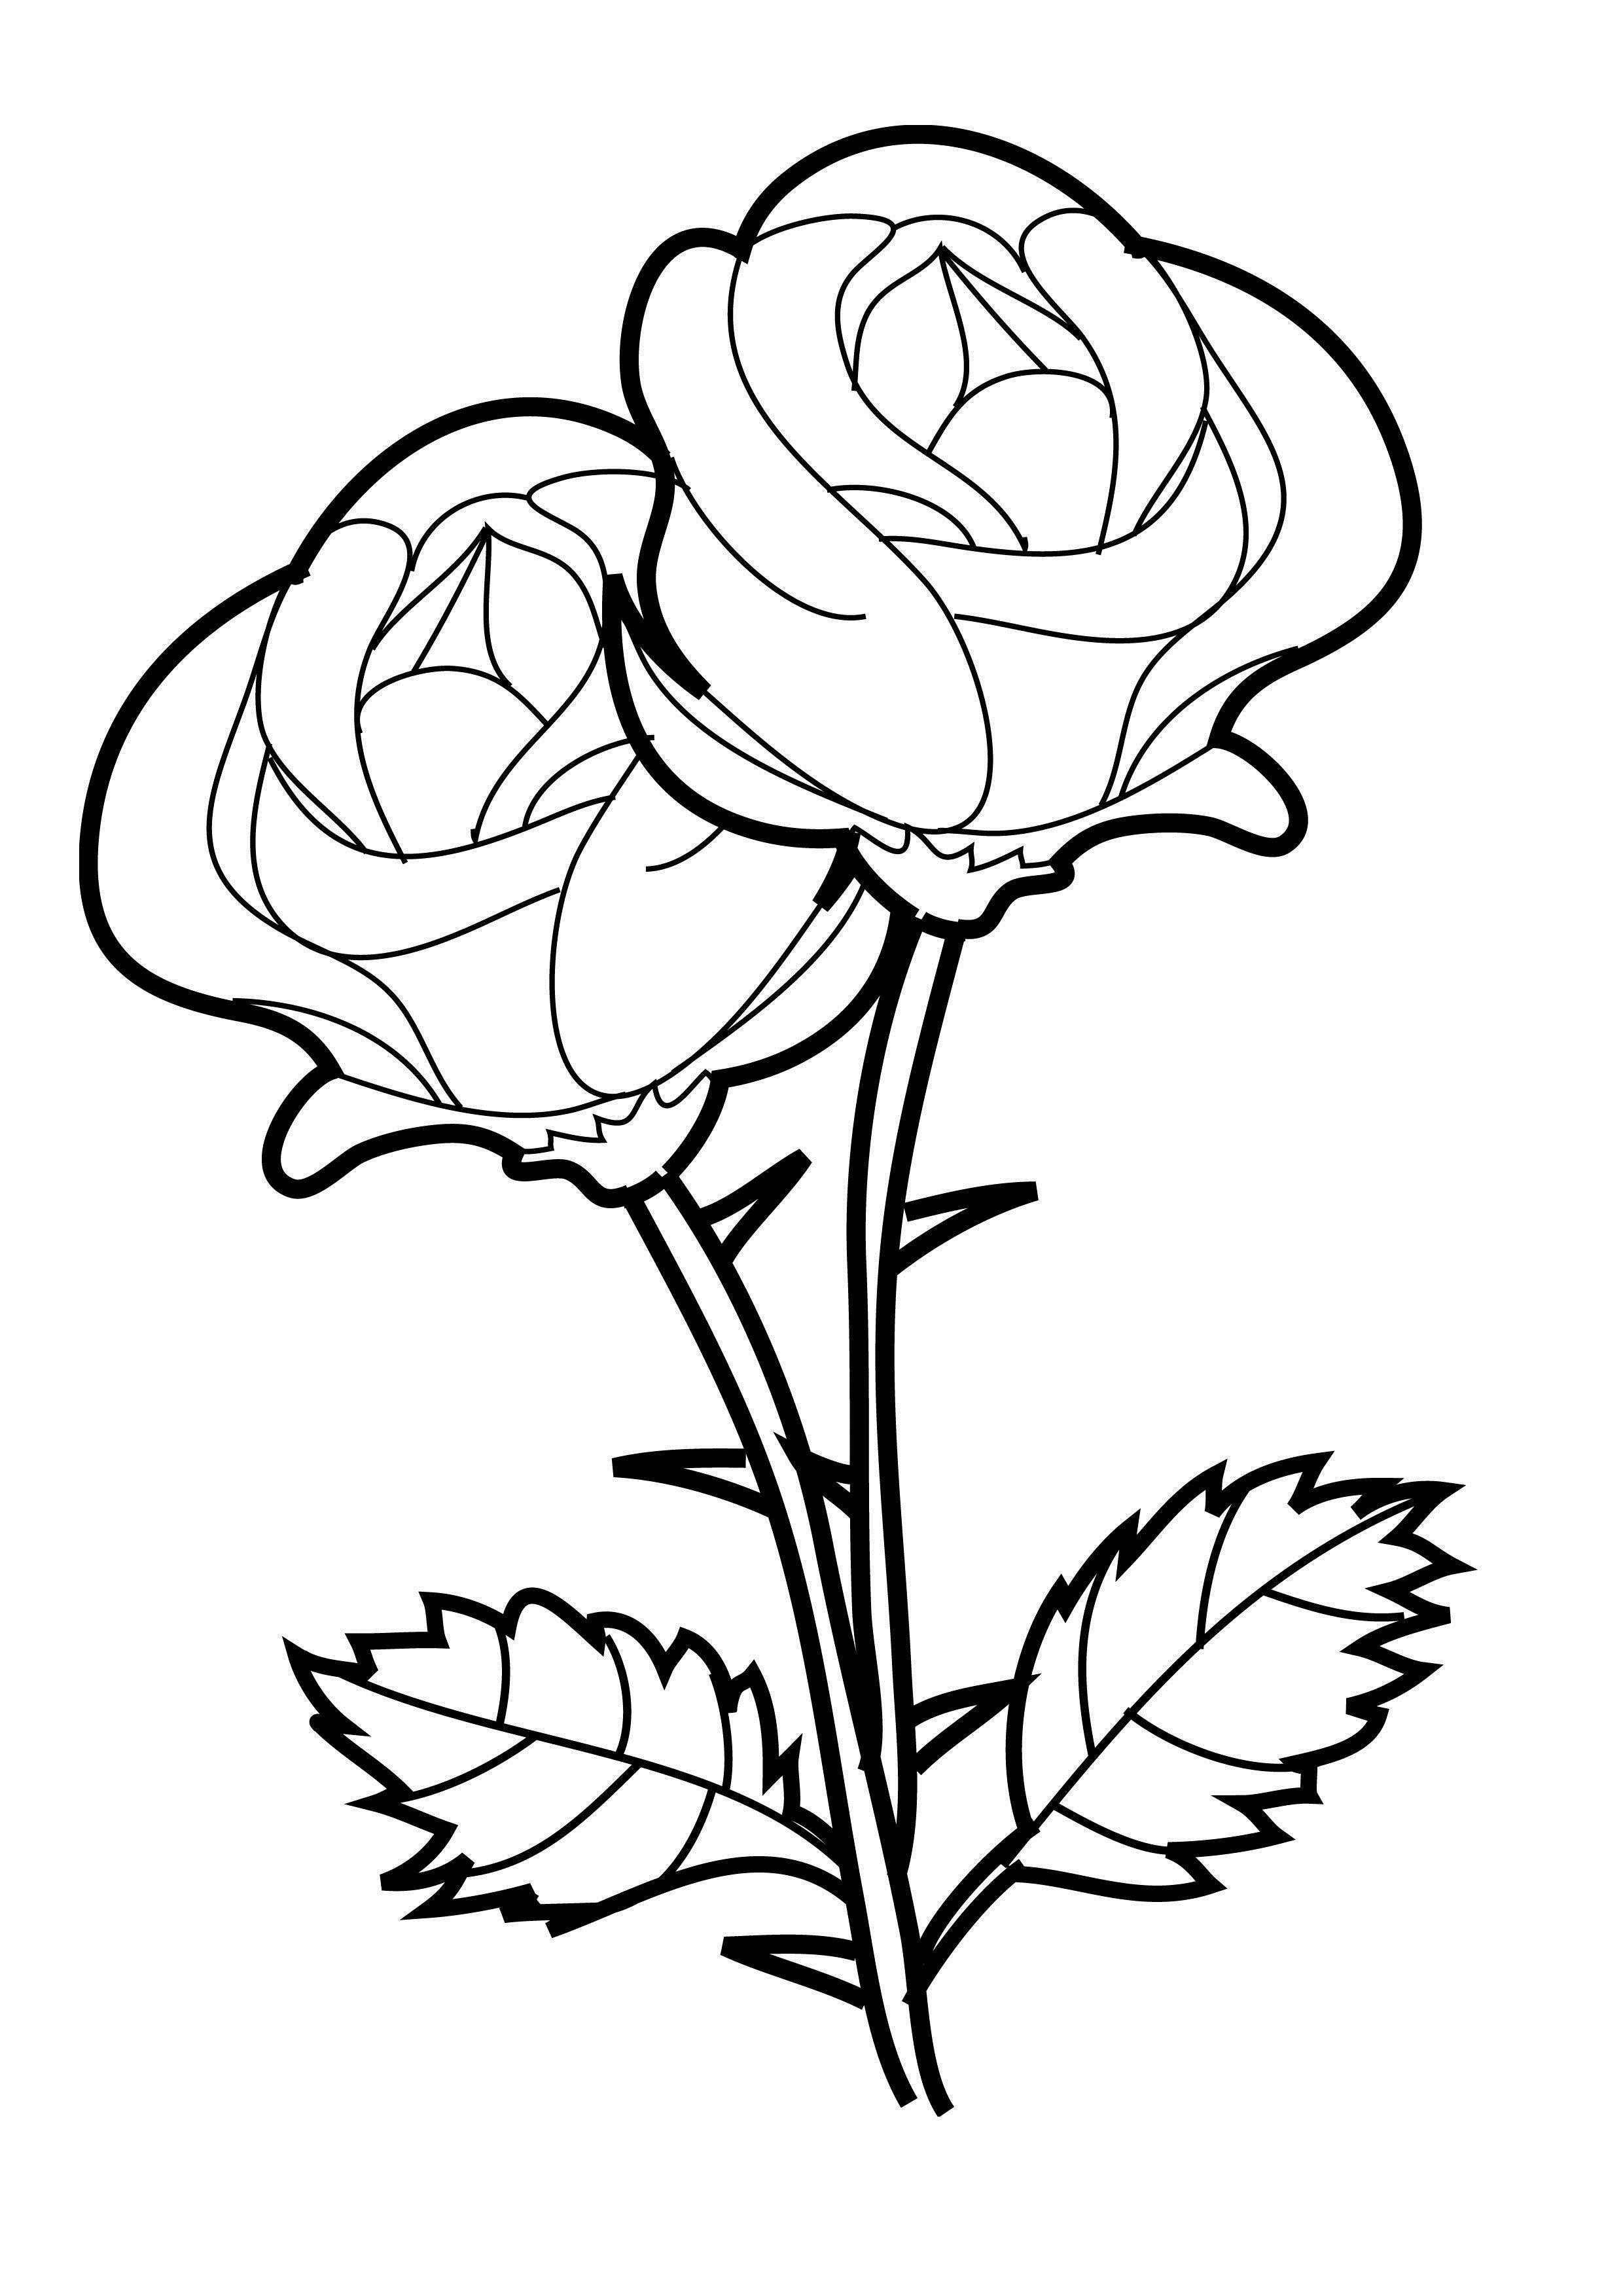 Rose Coloring Pages For Adults
 Free Printable Roses Coloring Pages For Kids